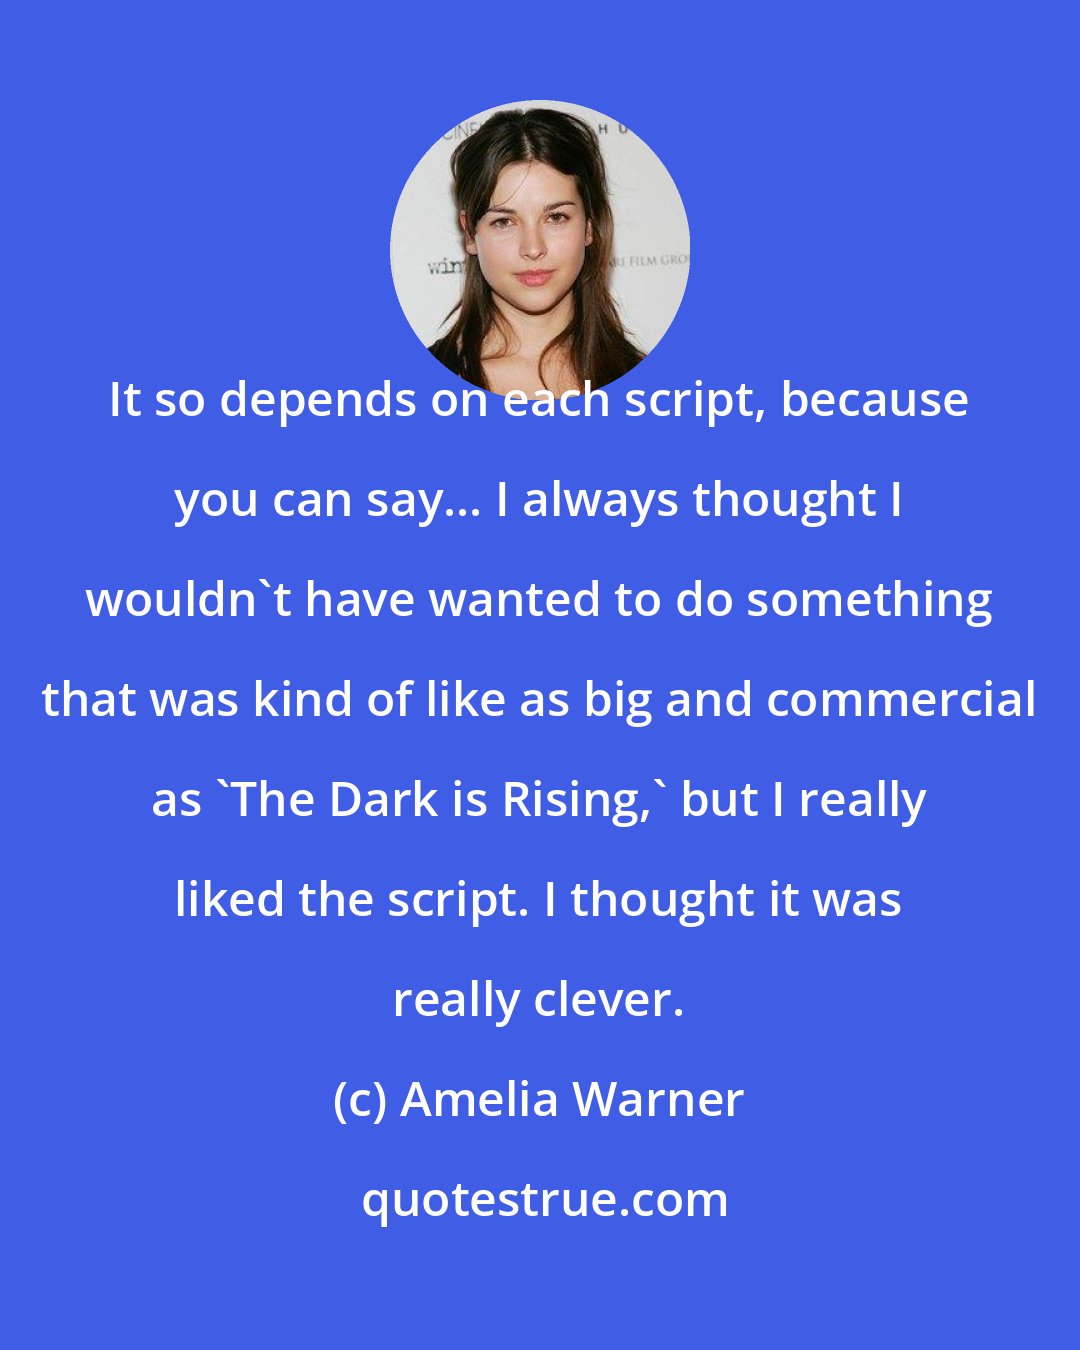 Amelia Warner: It so depends on each script, because you can say... I always thought I wouldn't have wanted to do something that was kind of like as big and commercial as 'The Dark is Rising,' but I really liked the script. I thought it was really clever.